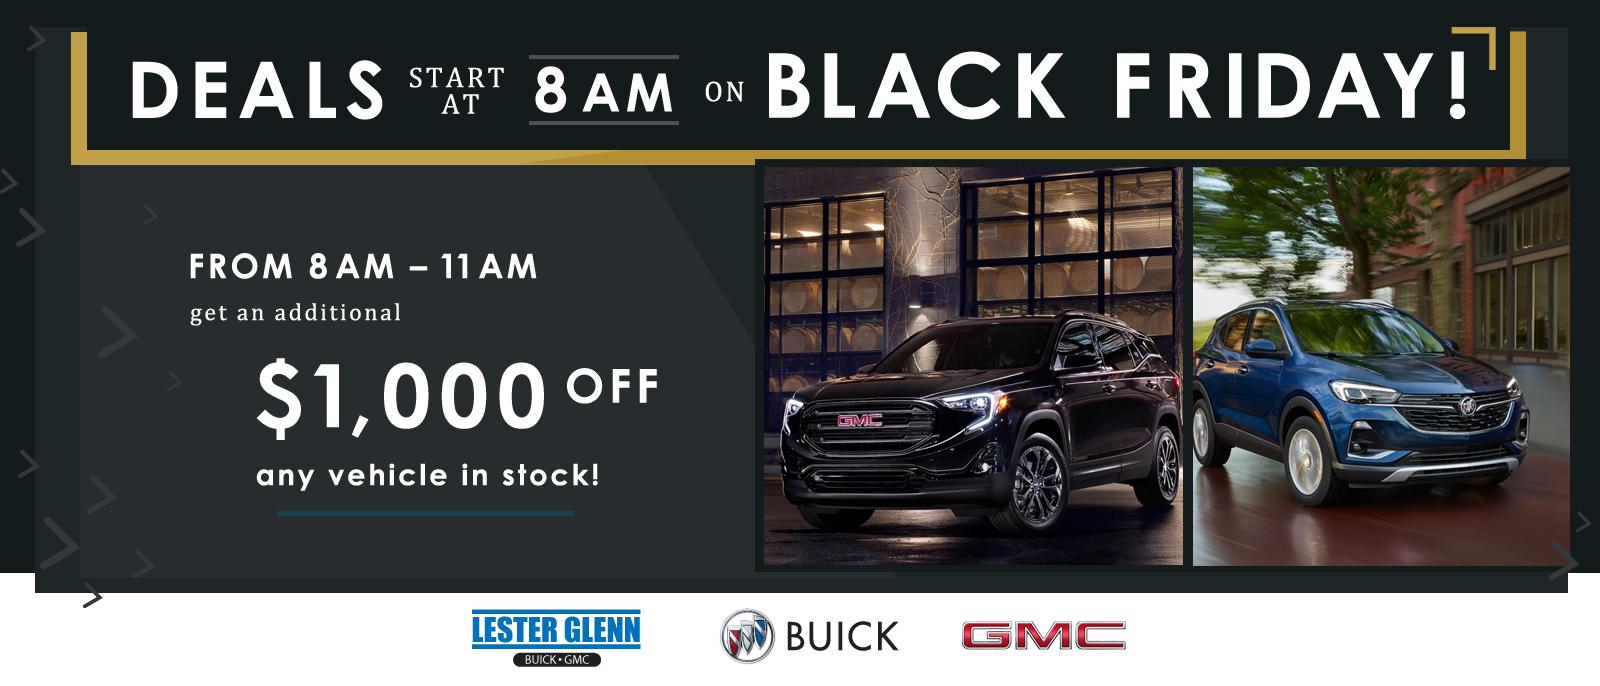 Lester Glenn Buick GMC is a TOMS RIVER Buick, GMC dealer and a new car